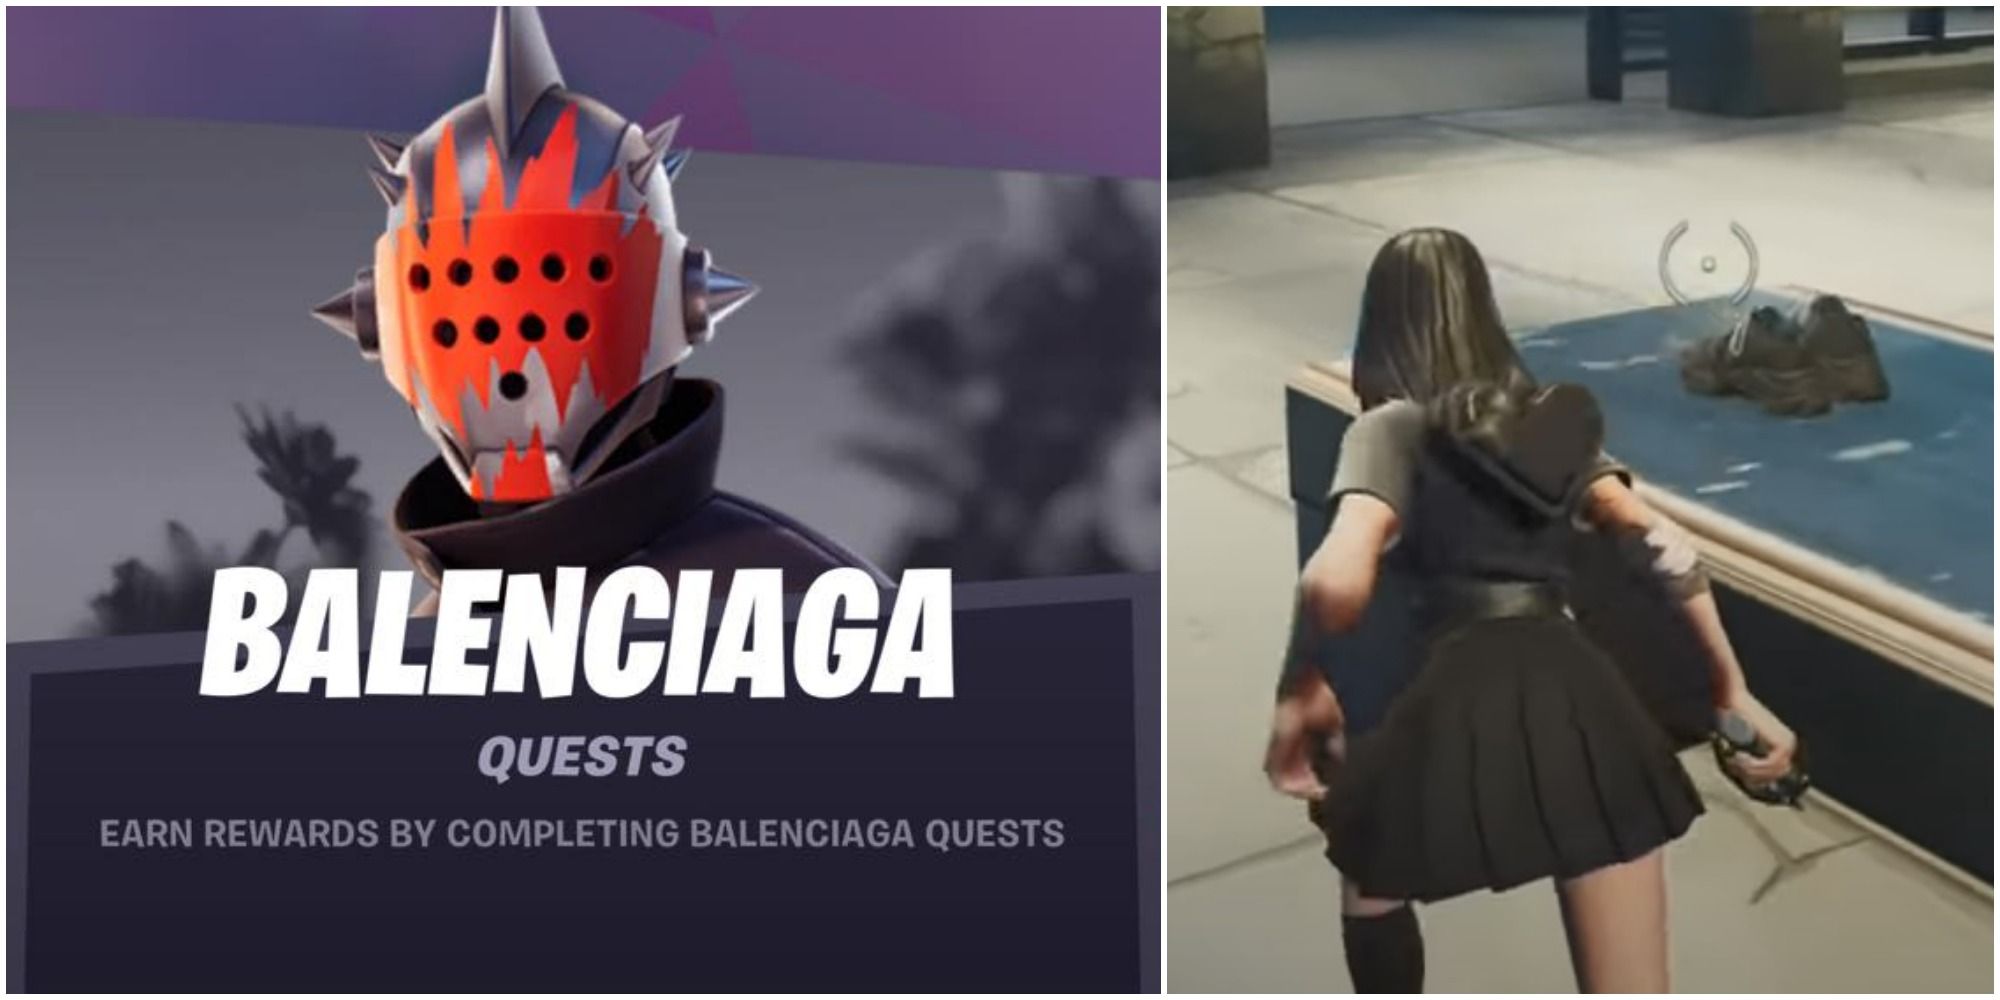 Authentic Balenciaga looks released in video game Fortnite